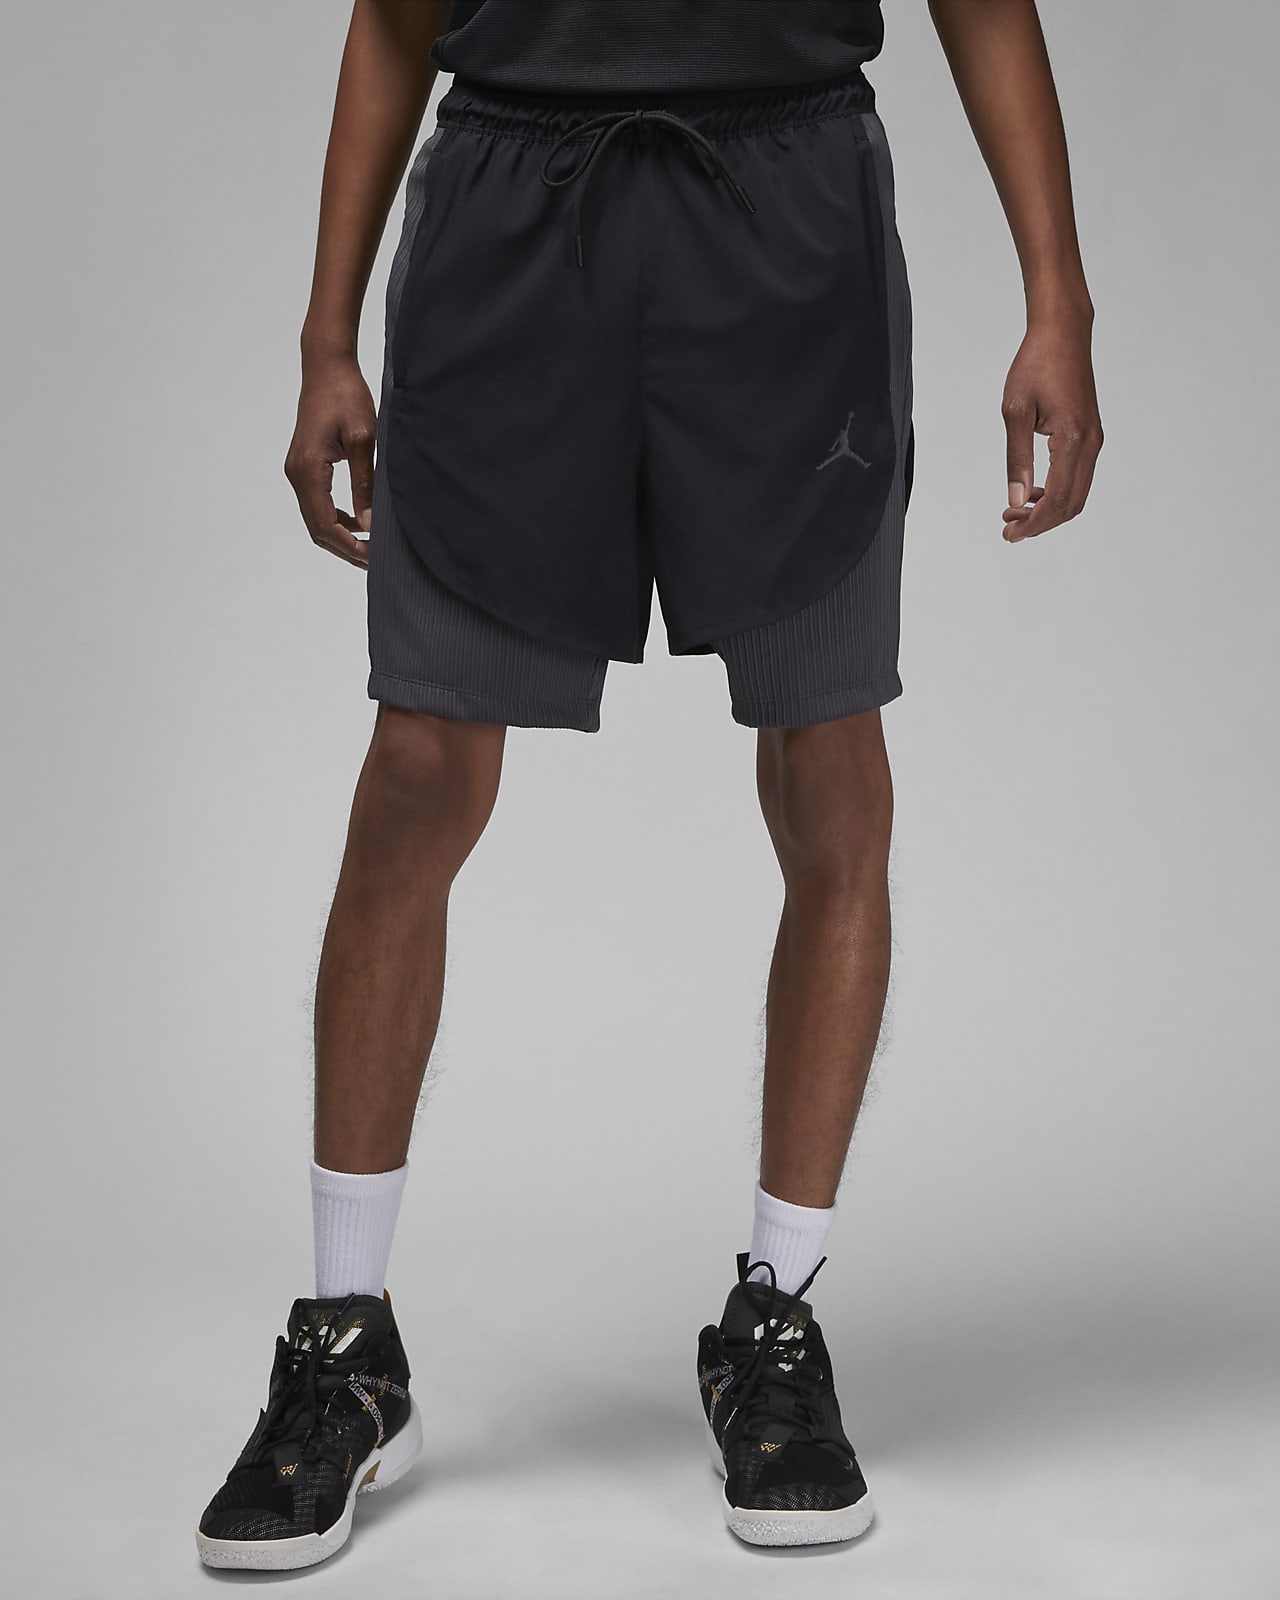 Get court-ready with the Nike Dri-FIT NBA Icon+ Practice